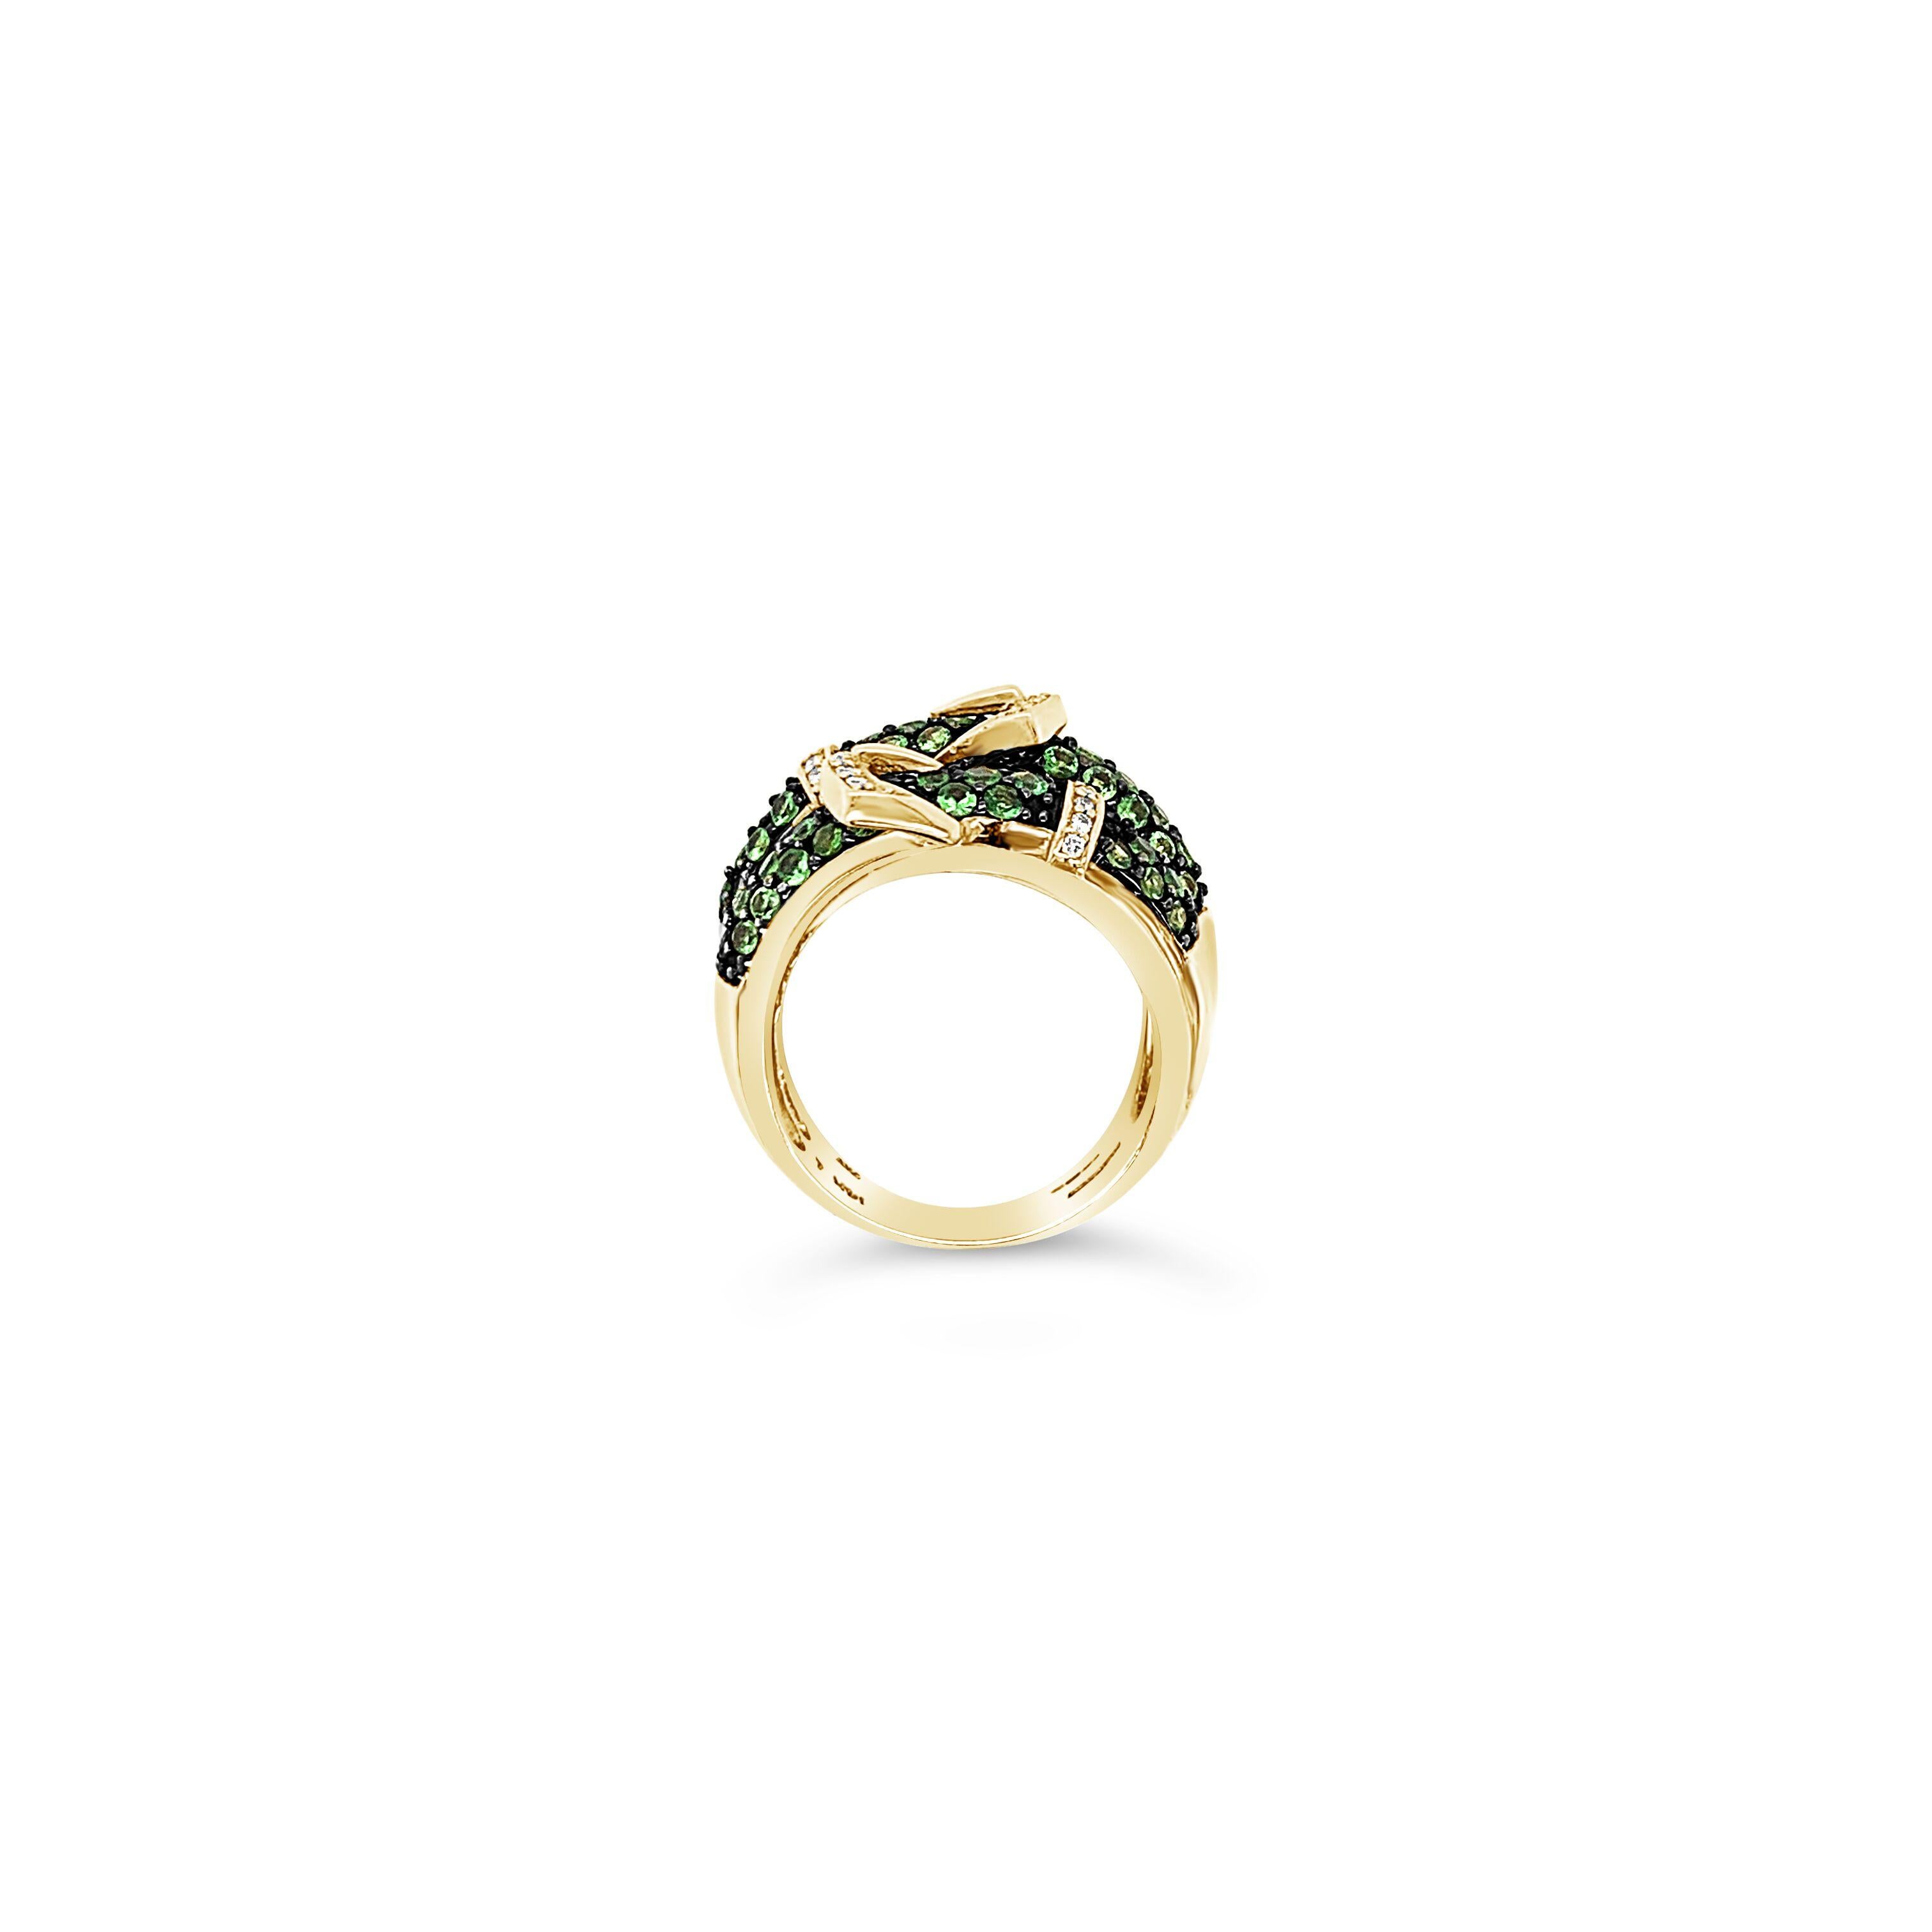 Le Vian® Ring featuring 1 3/4 cts. Forest Green Tsavorite™, 1/10 cts. Vanilla Diamonds® set in 14K Honey Gold™

Ring Size: 7

Ring may or may not be sizable, please feel free to reach out with any questions!

Item comes with a Le Vian® jewelry box